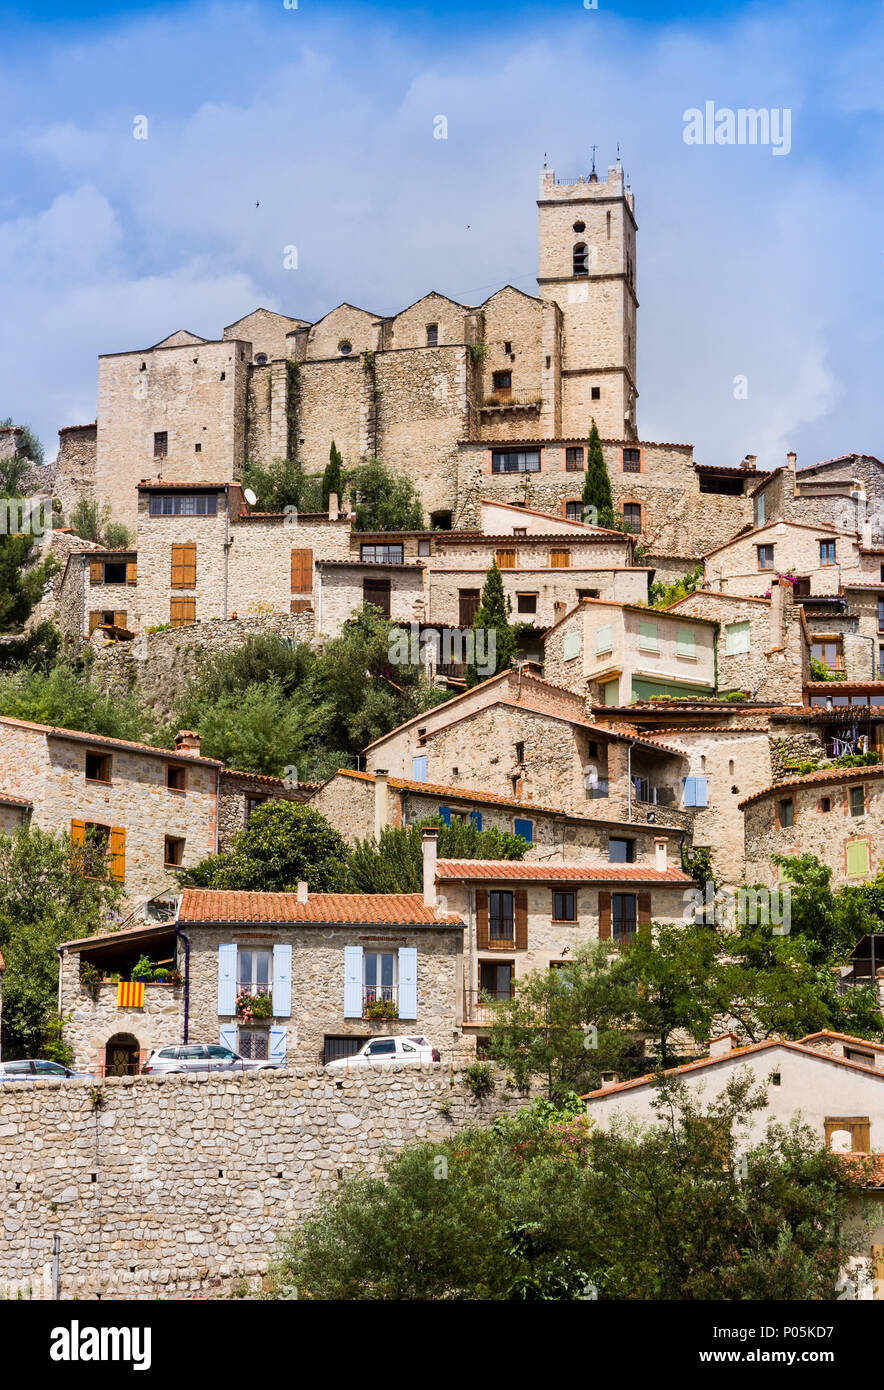 View of village of Eus in Pyrenees-Orientales, Languedoc-Roussillon. Eus is listed as one of the 100 most beautiful villages in France Stock Photo